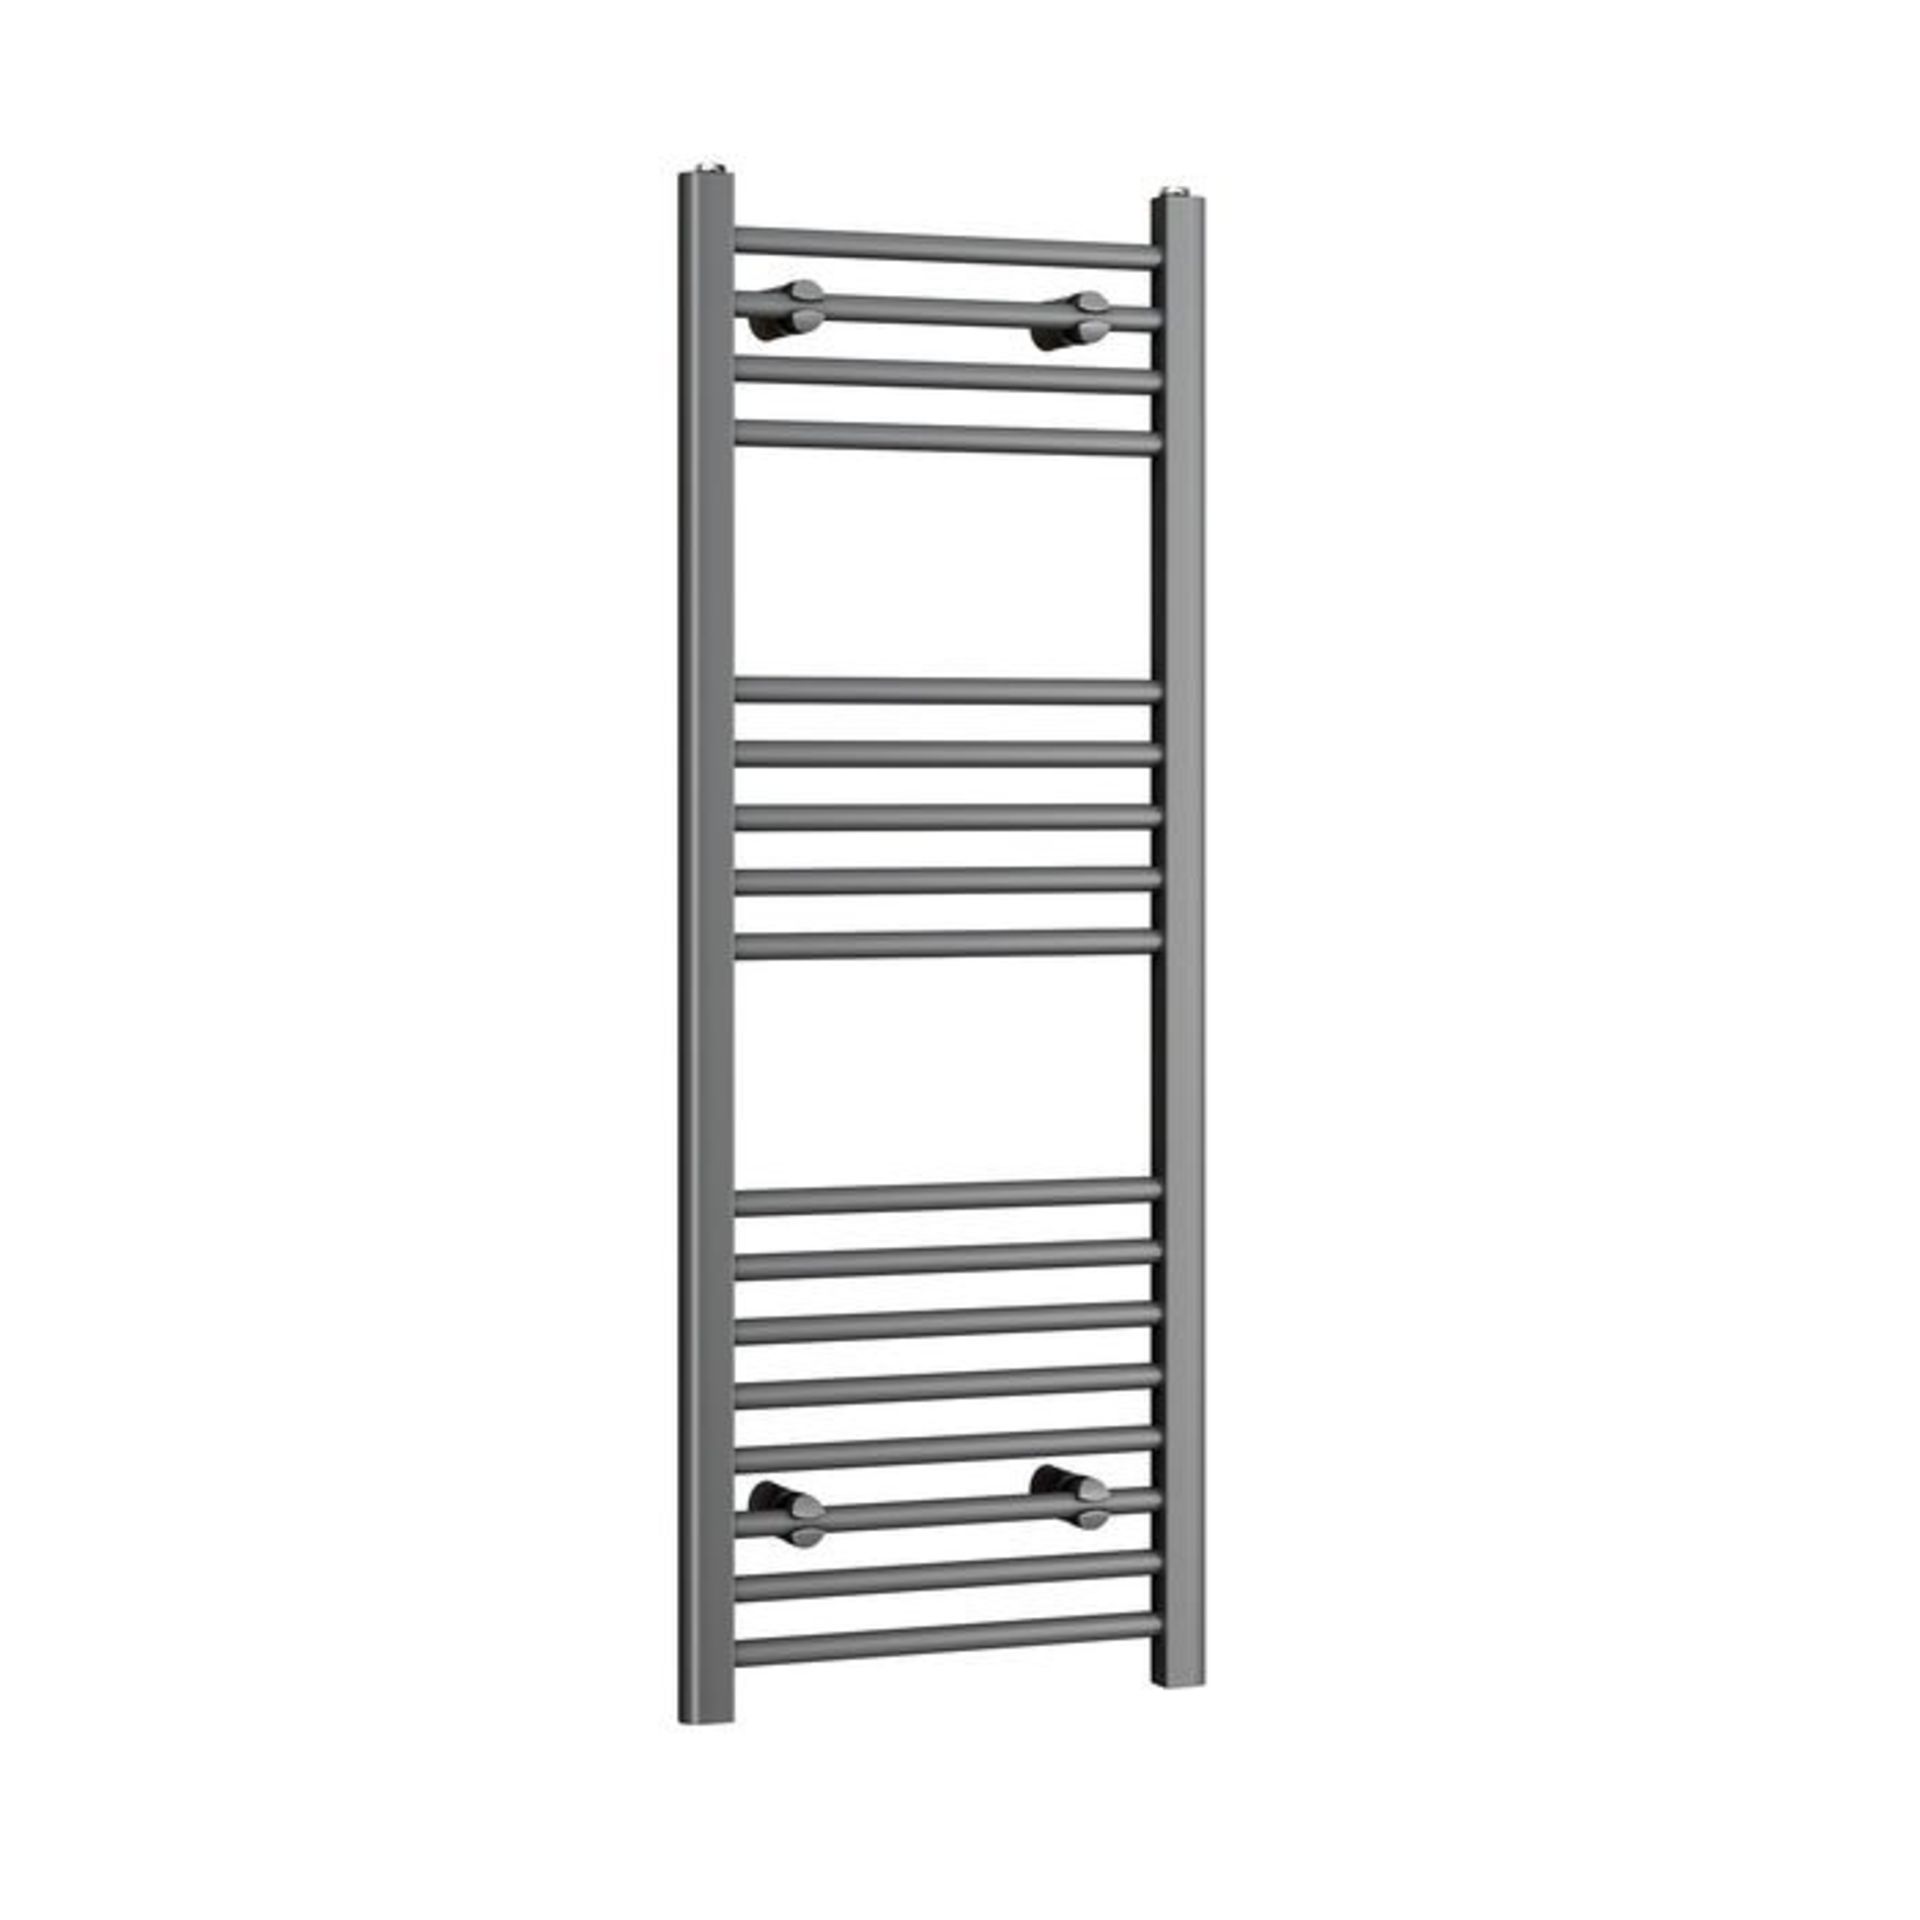 (S113) 1200x450mm - 20mm Tubes - Anthracite Heated Straight Rail Ladder Towel Radiator RRP £137.99 - Image 3 of 3